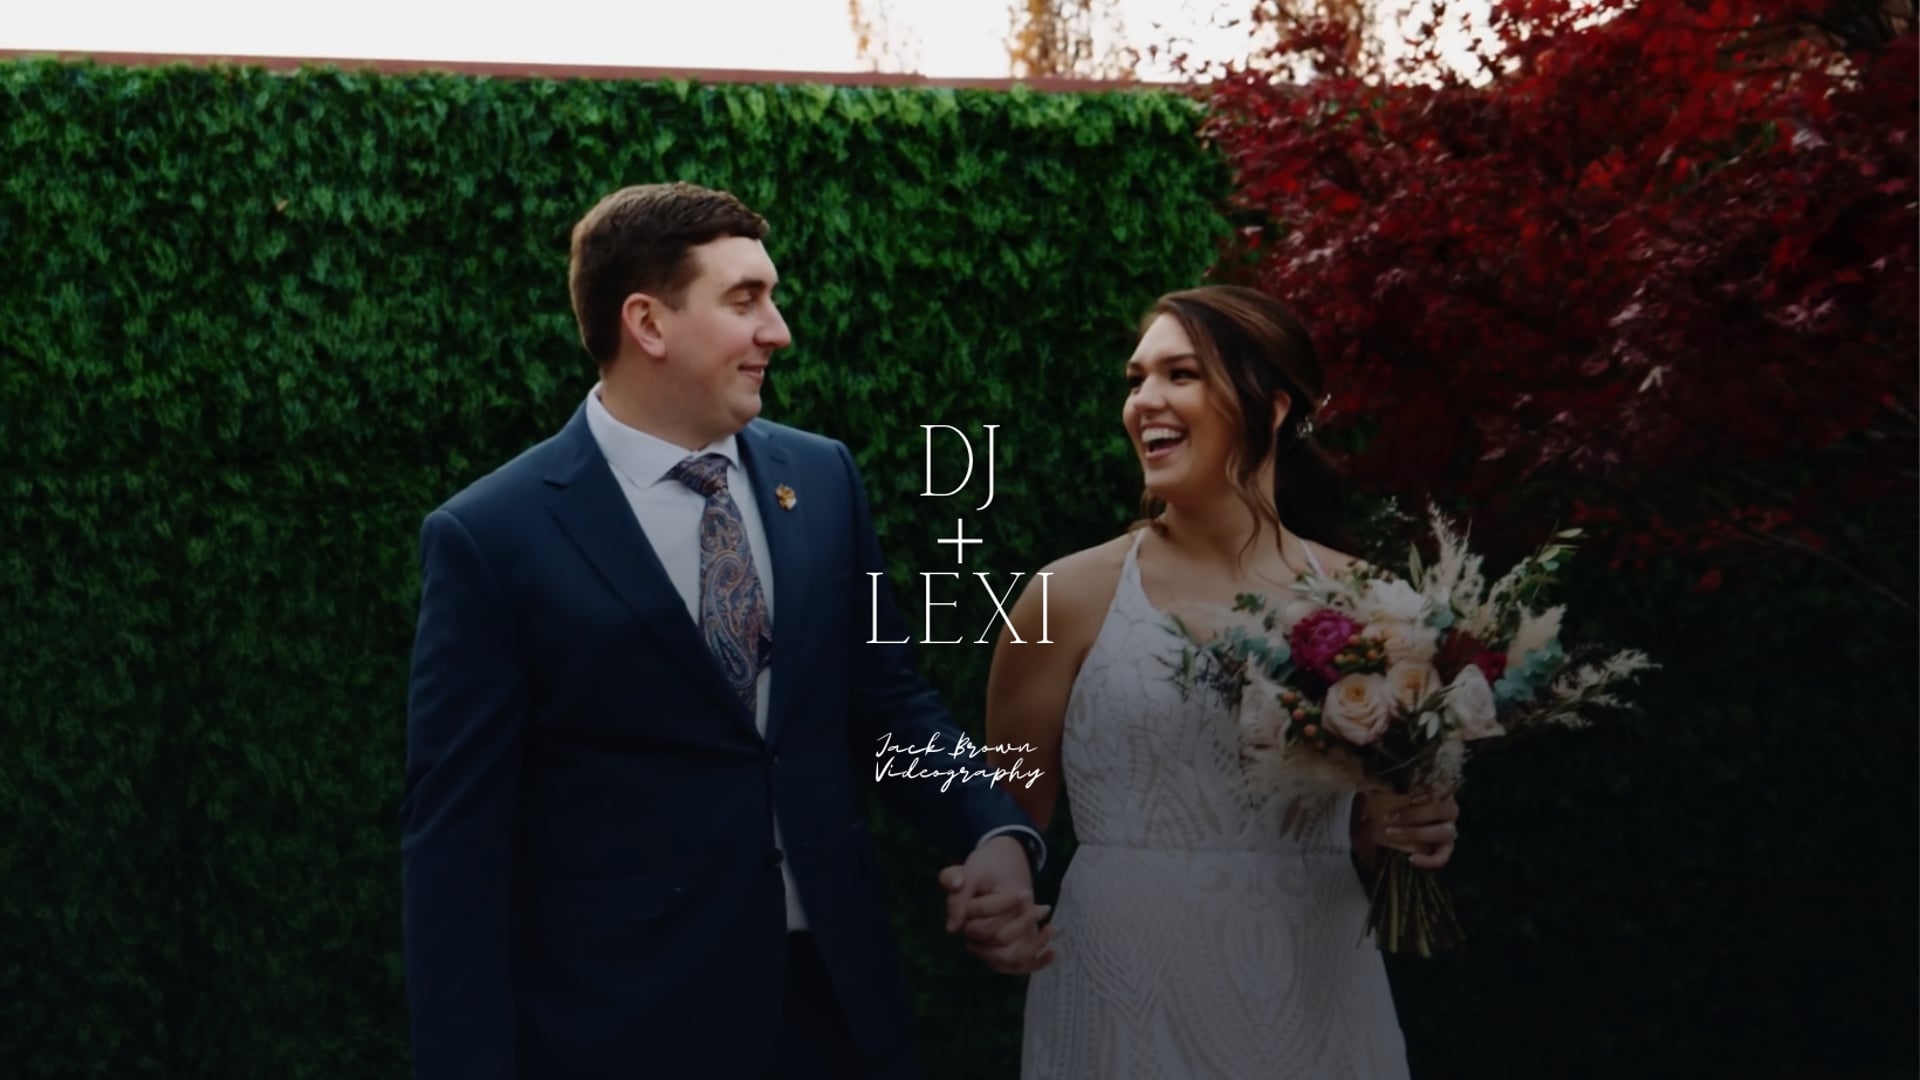 DJ + Lexi - The Most Sentimental Wedding I've Ever Been a Part of!